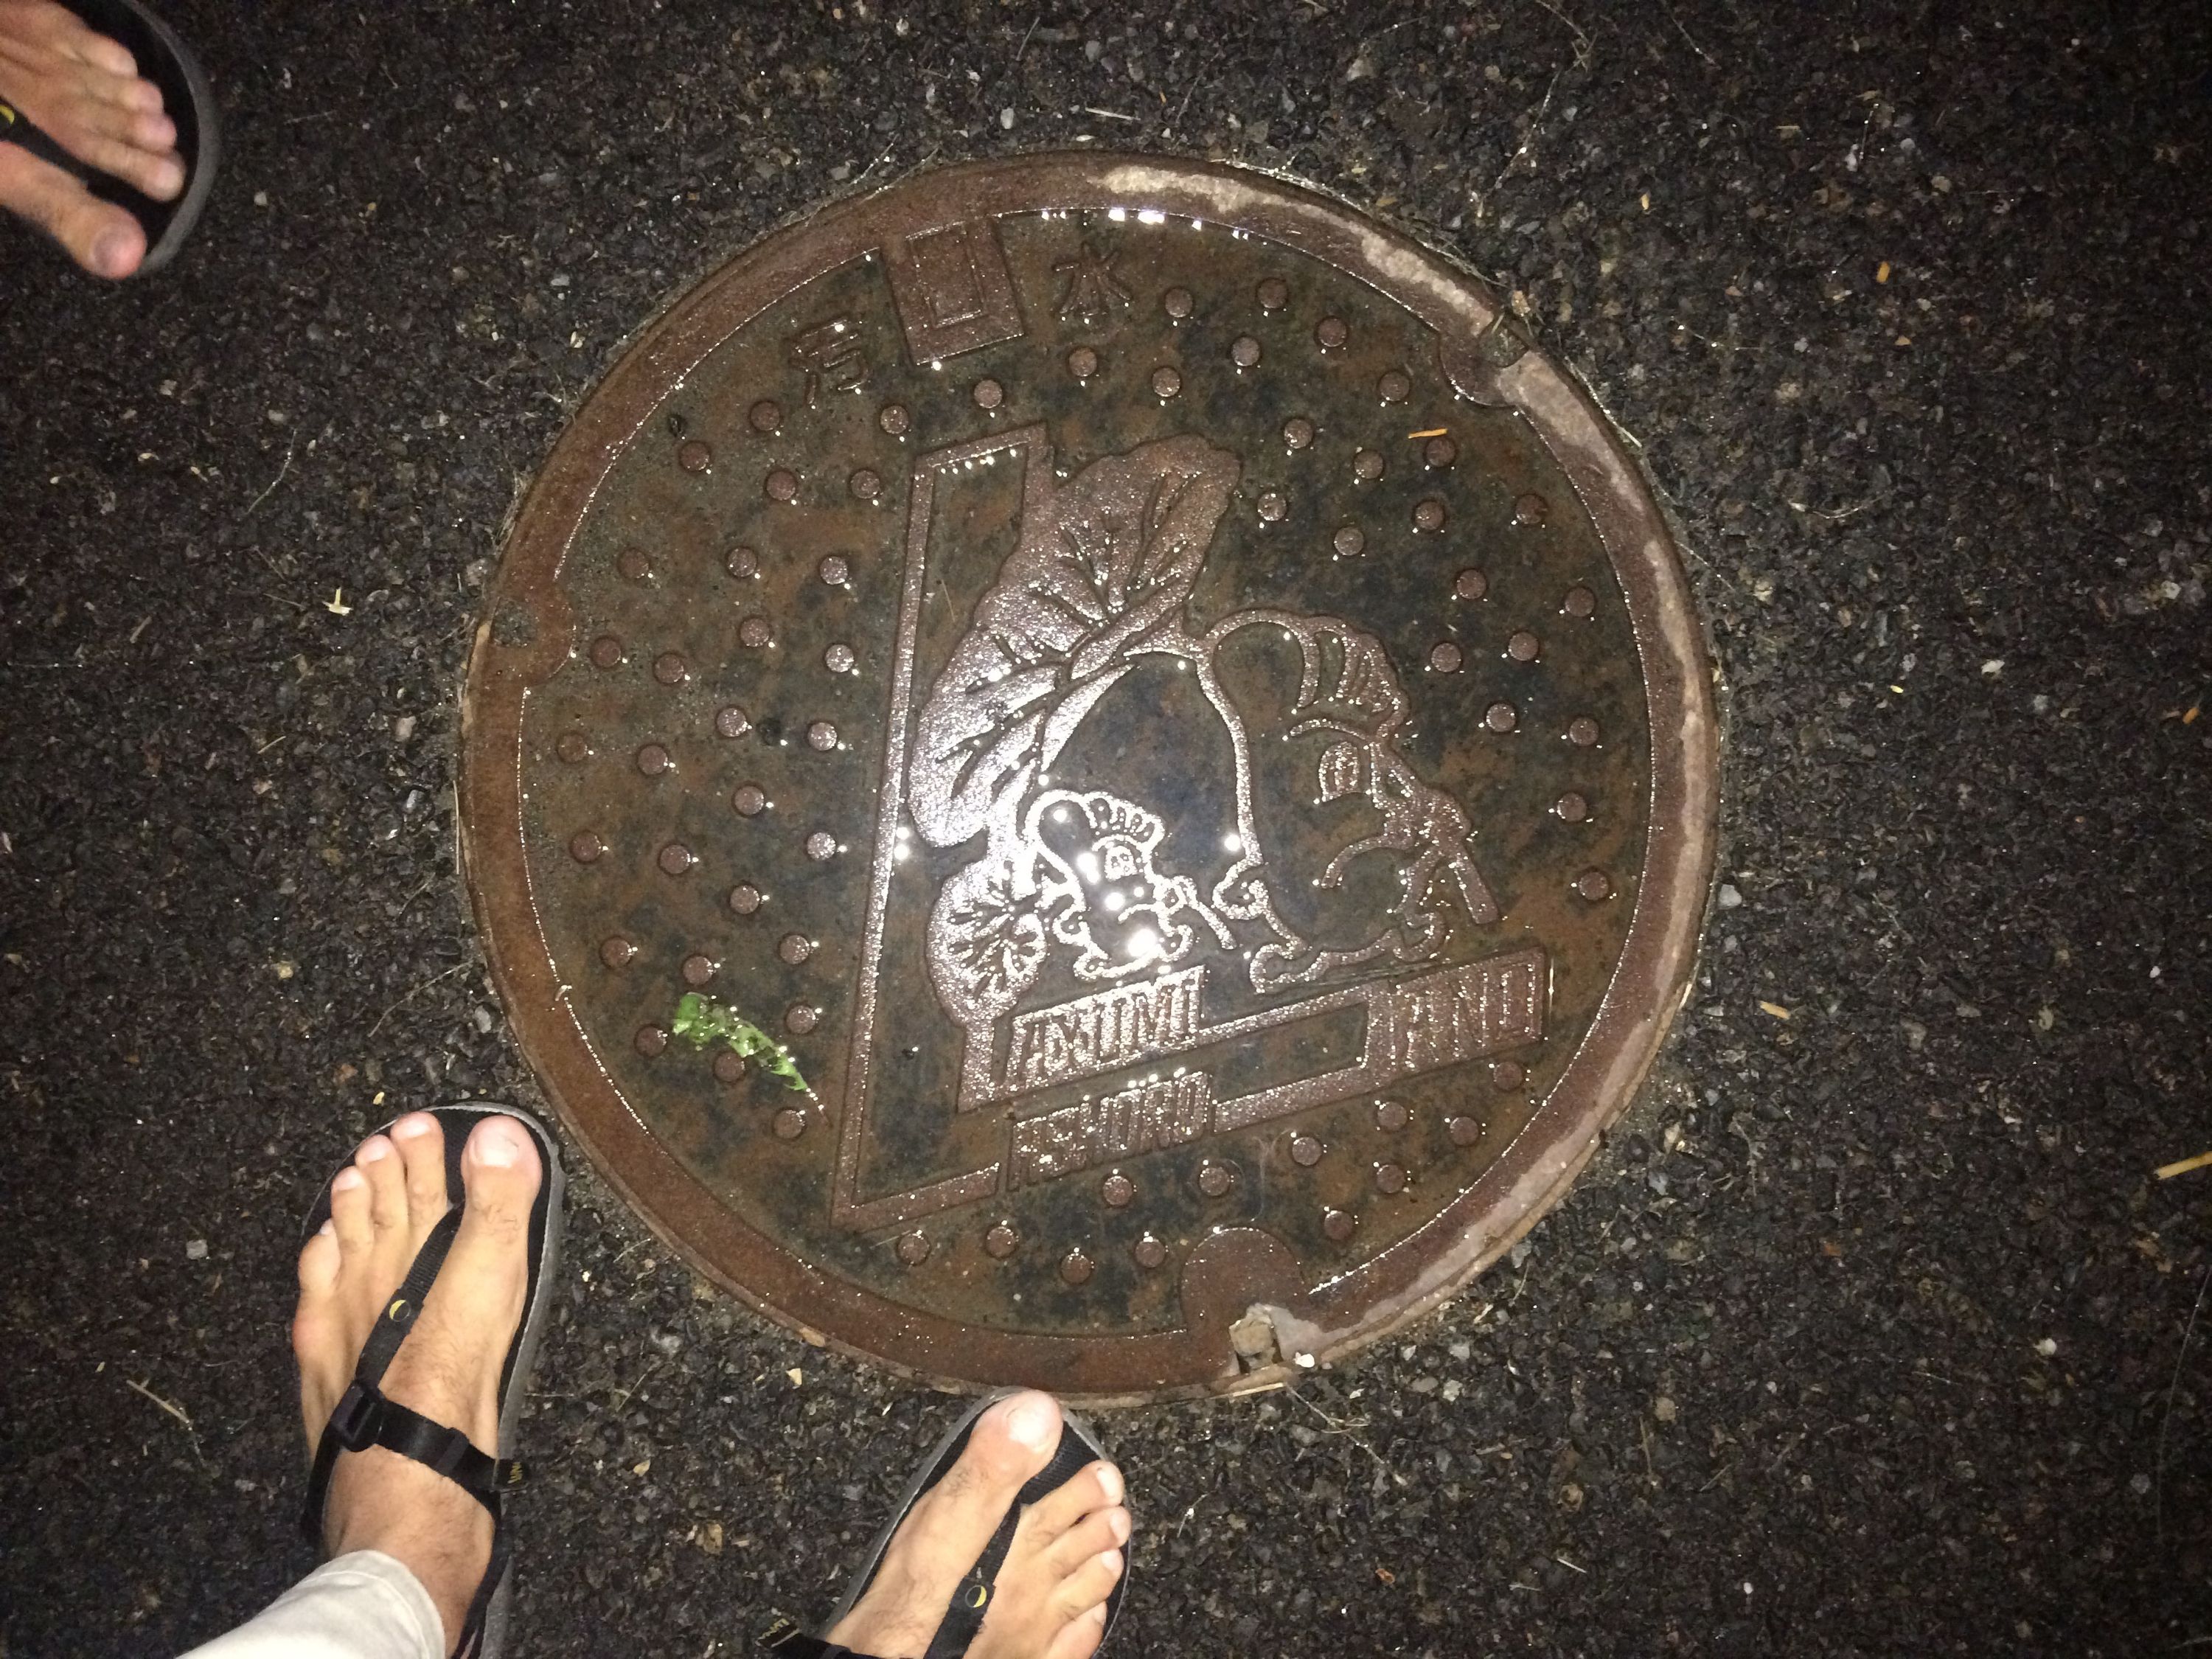 The bare, sandalled feet of the author and Gabor around a manhole cover decorated with two large feet holding large leaves.